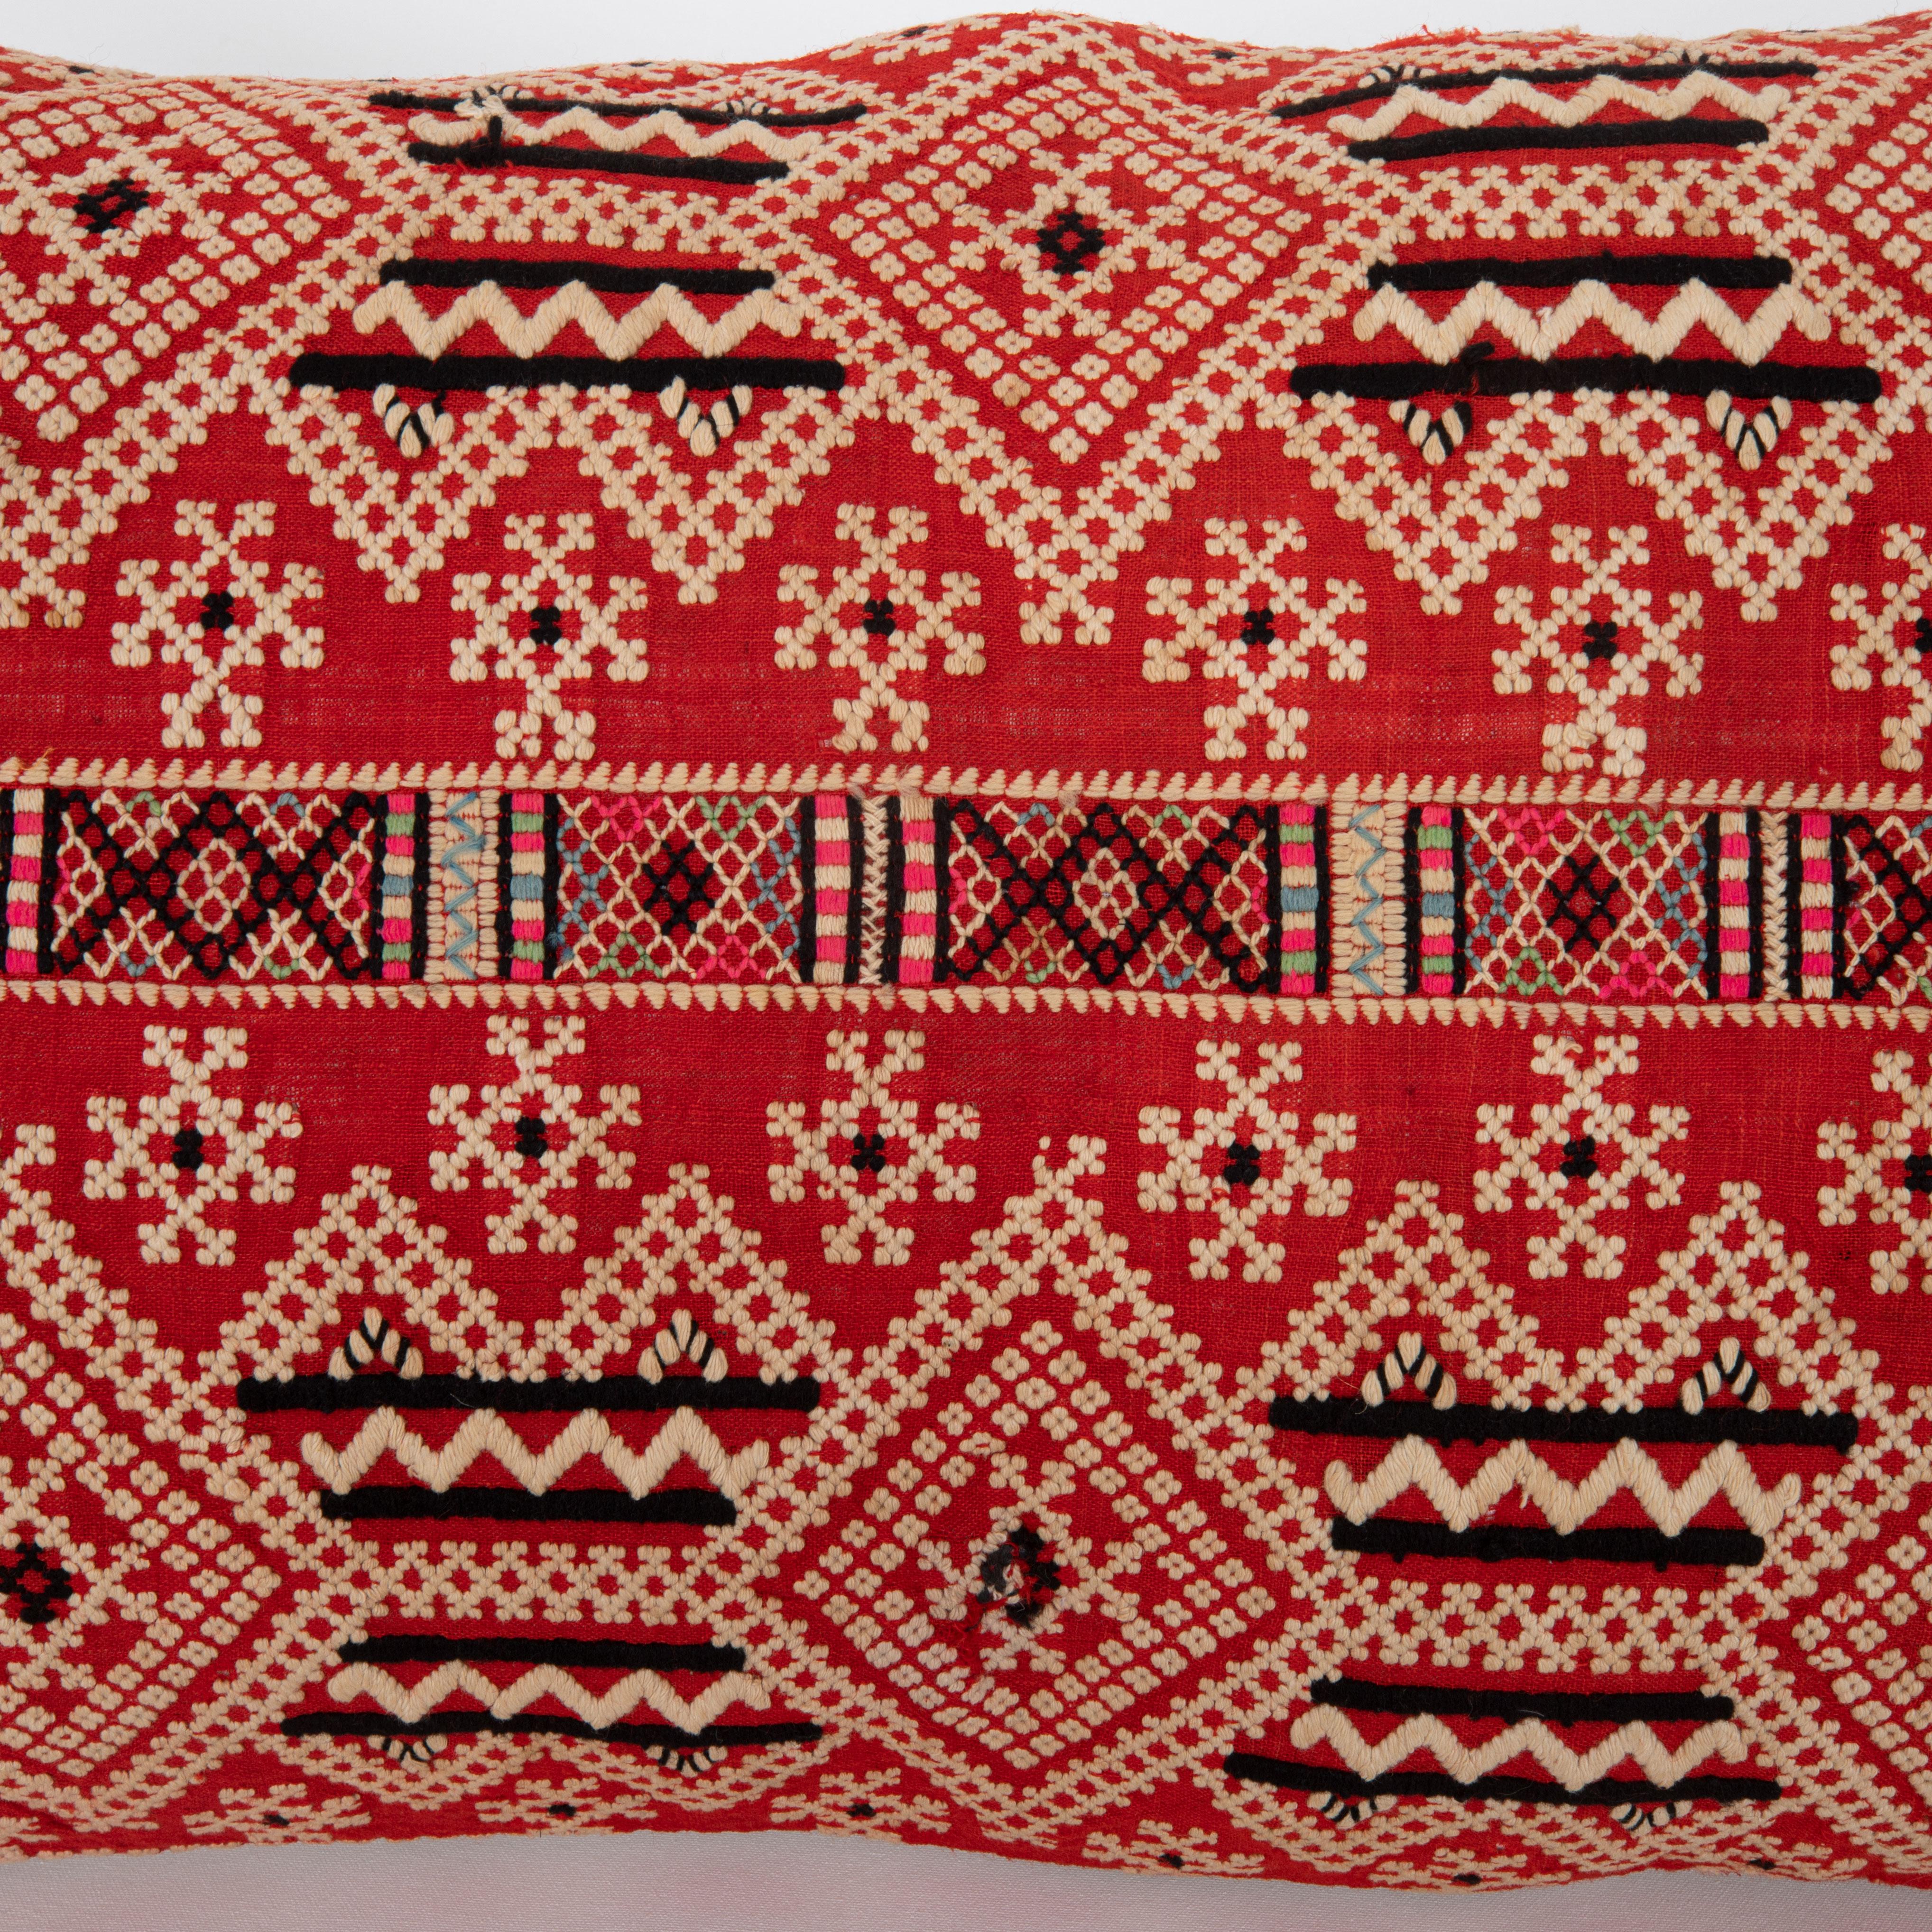 Bulgarian Pillow Case Made From an Mid 20th C Eastern European Apron For Sale